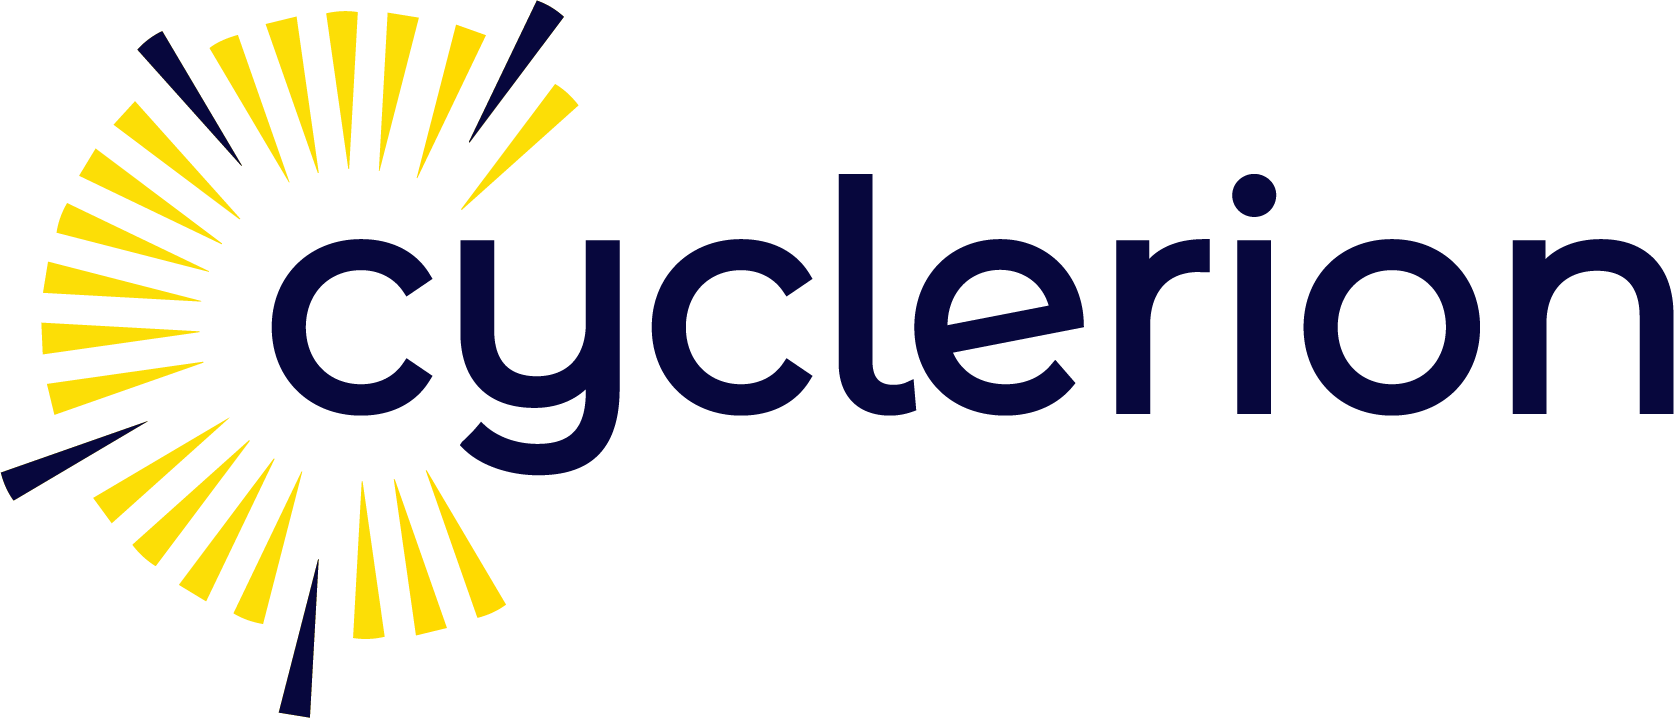 Cyclerion Therapeutics Receives U.S. FDA Orphan Drug Designation for Zagociguat for the Treatment of Mitochondrial Diseases